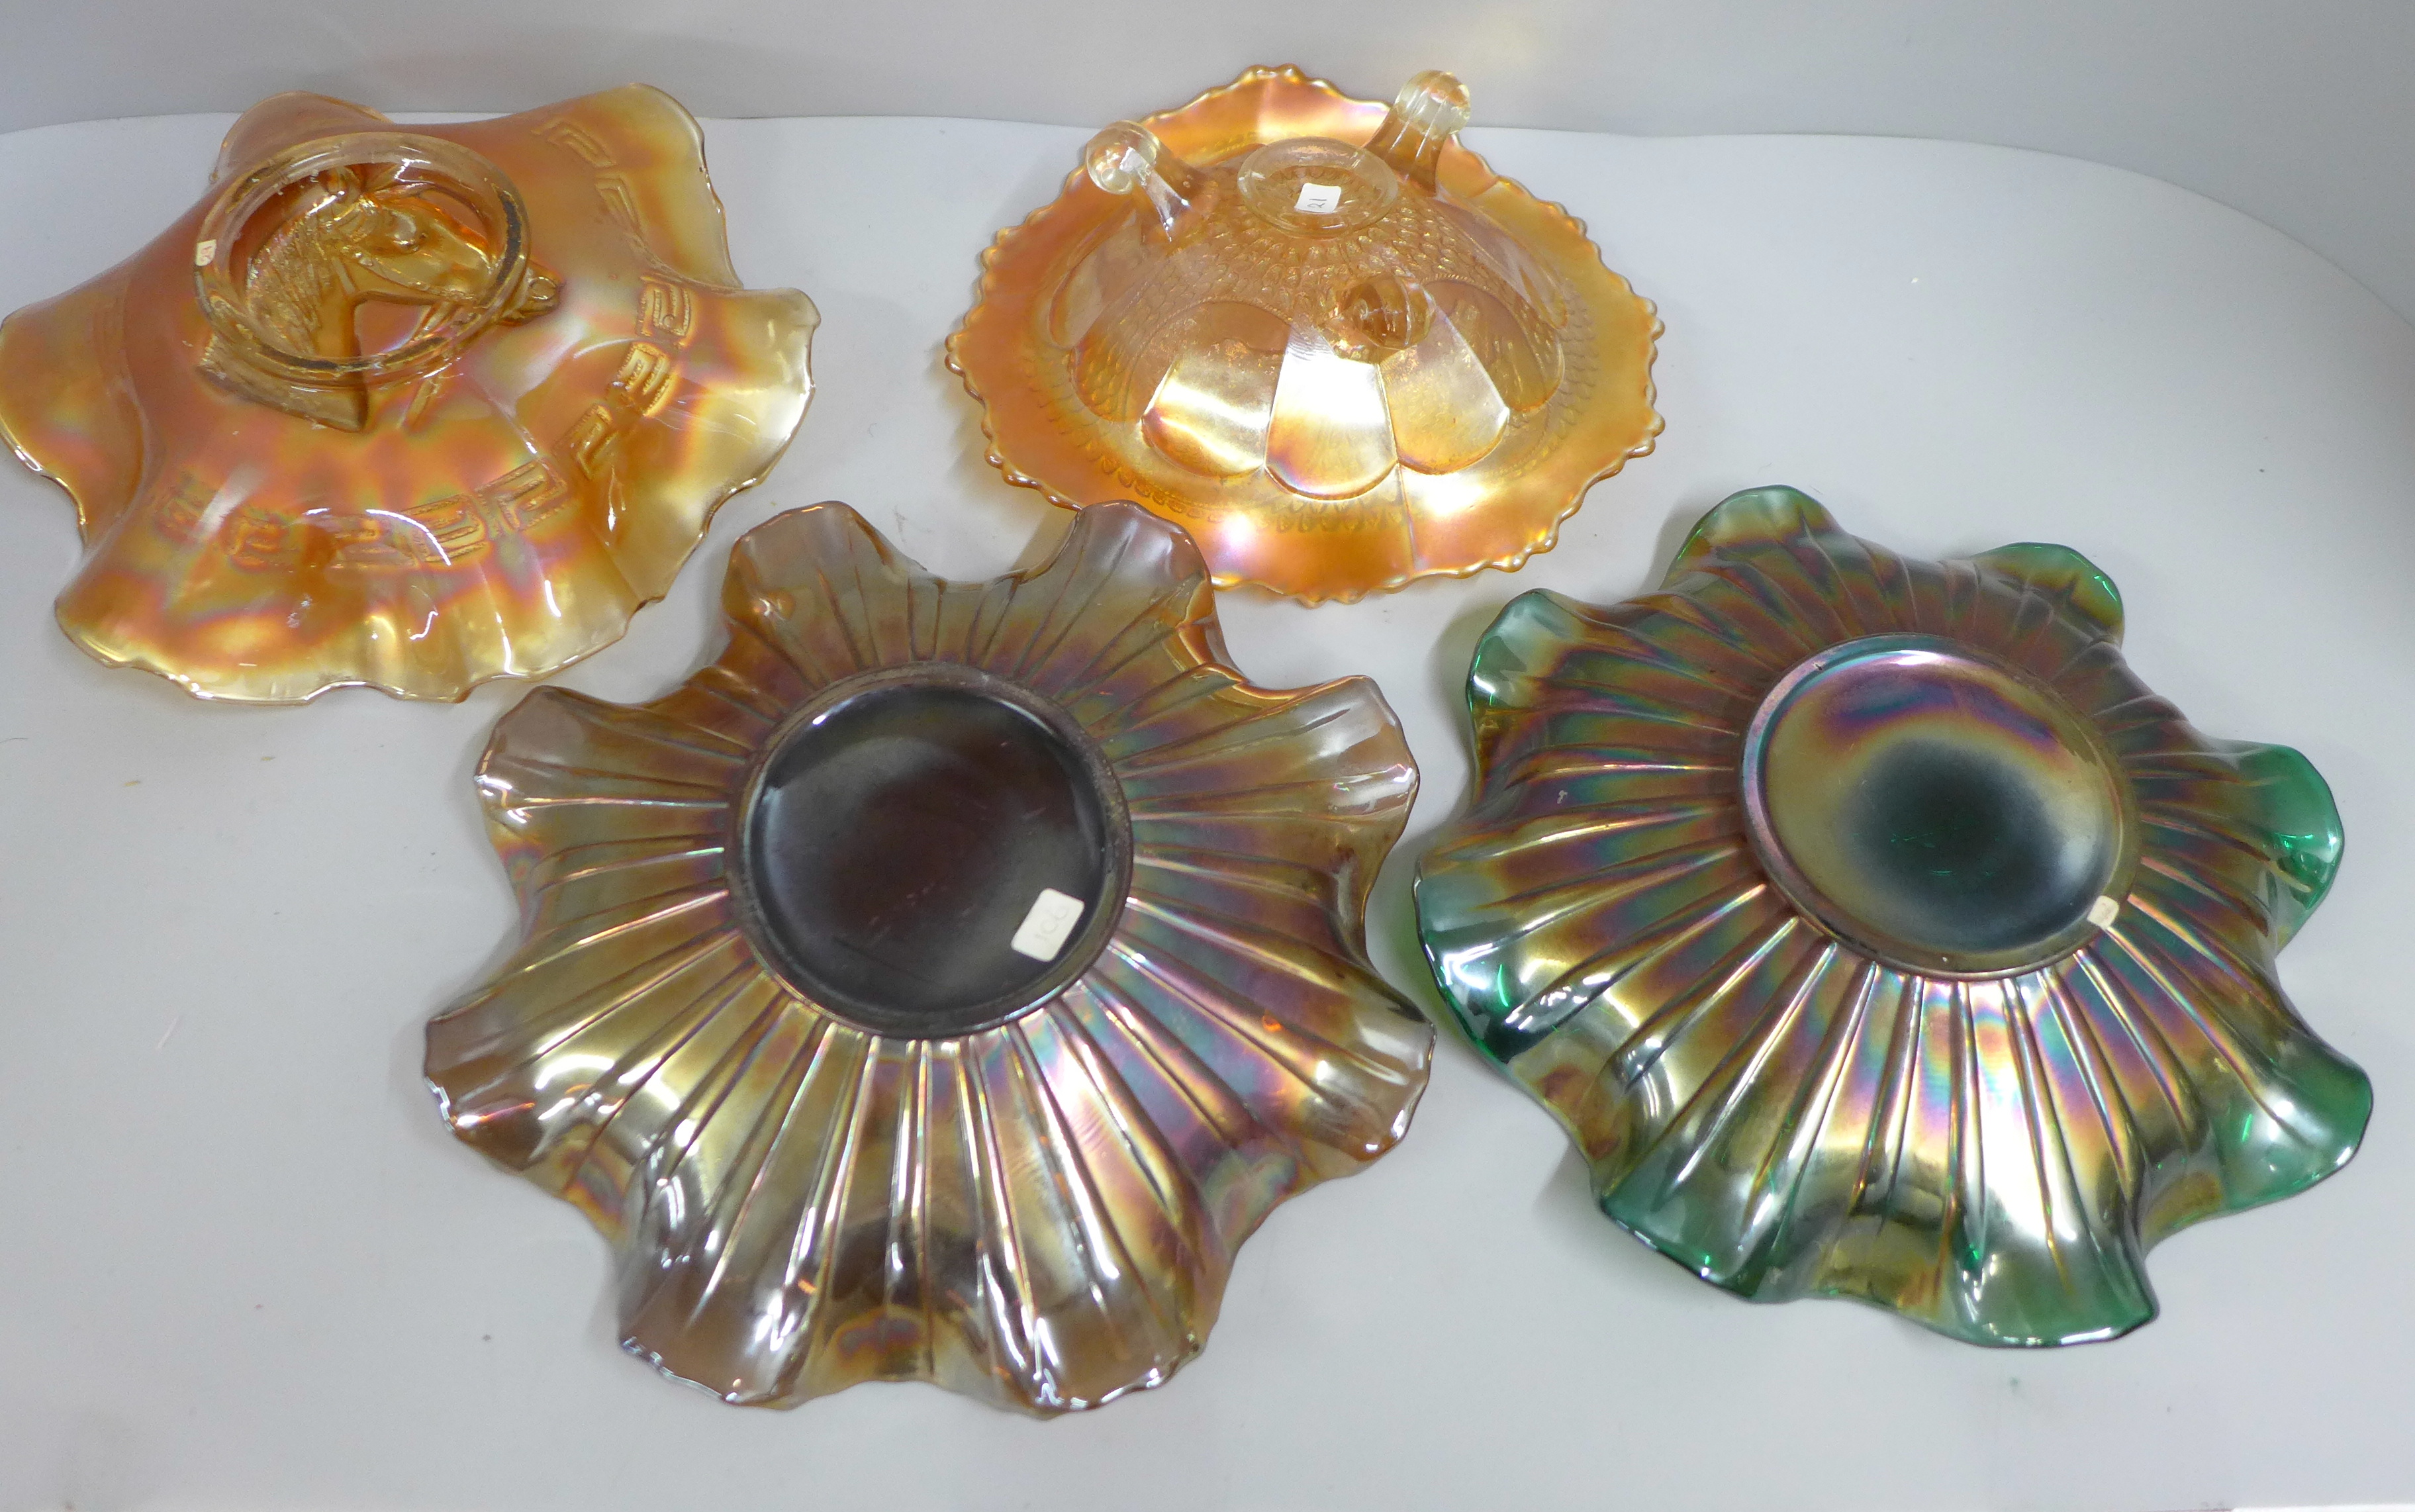 Four carnival glass bowls, two 'Good Luck', one Racehorse and one Horse Medallion, iridescent green, - Image 6 of 6